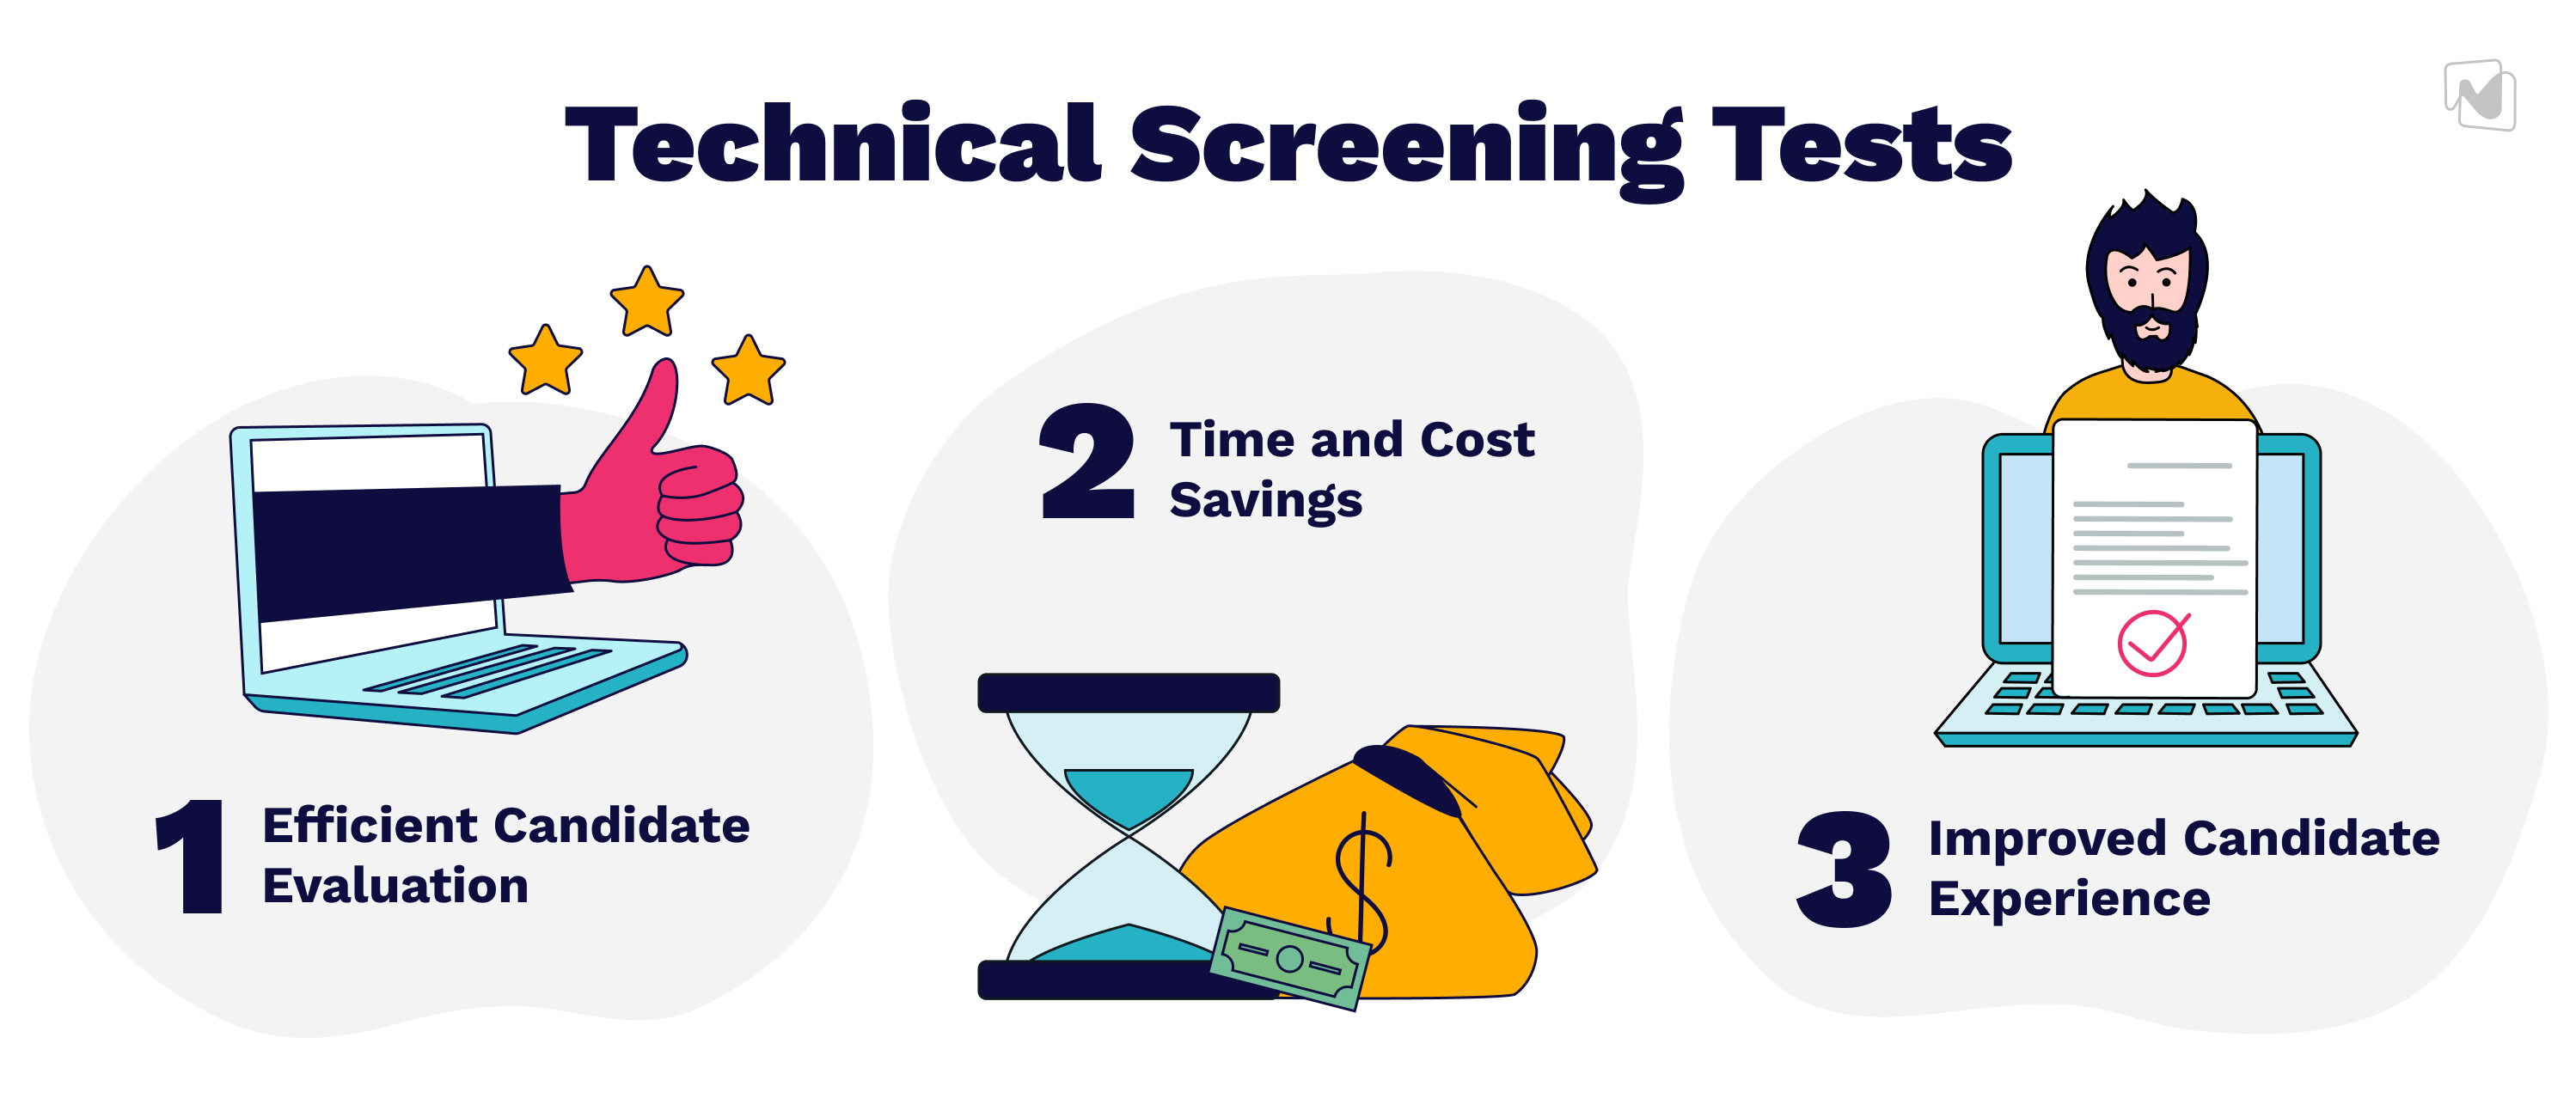 Varieties of Technical Screening Tests for Top Talent Recruitment